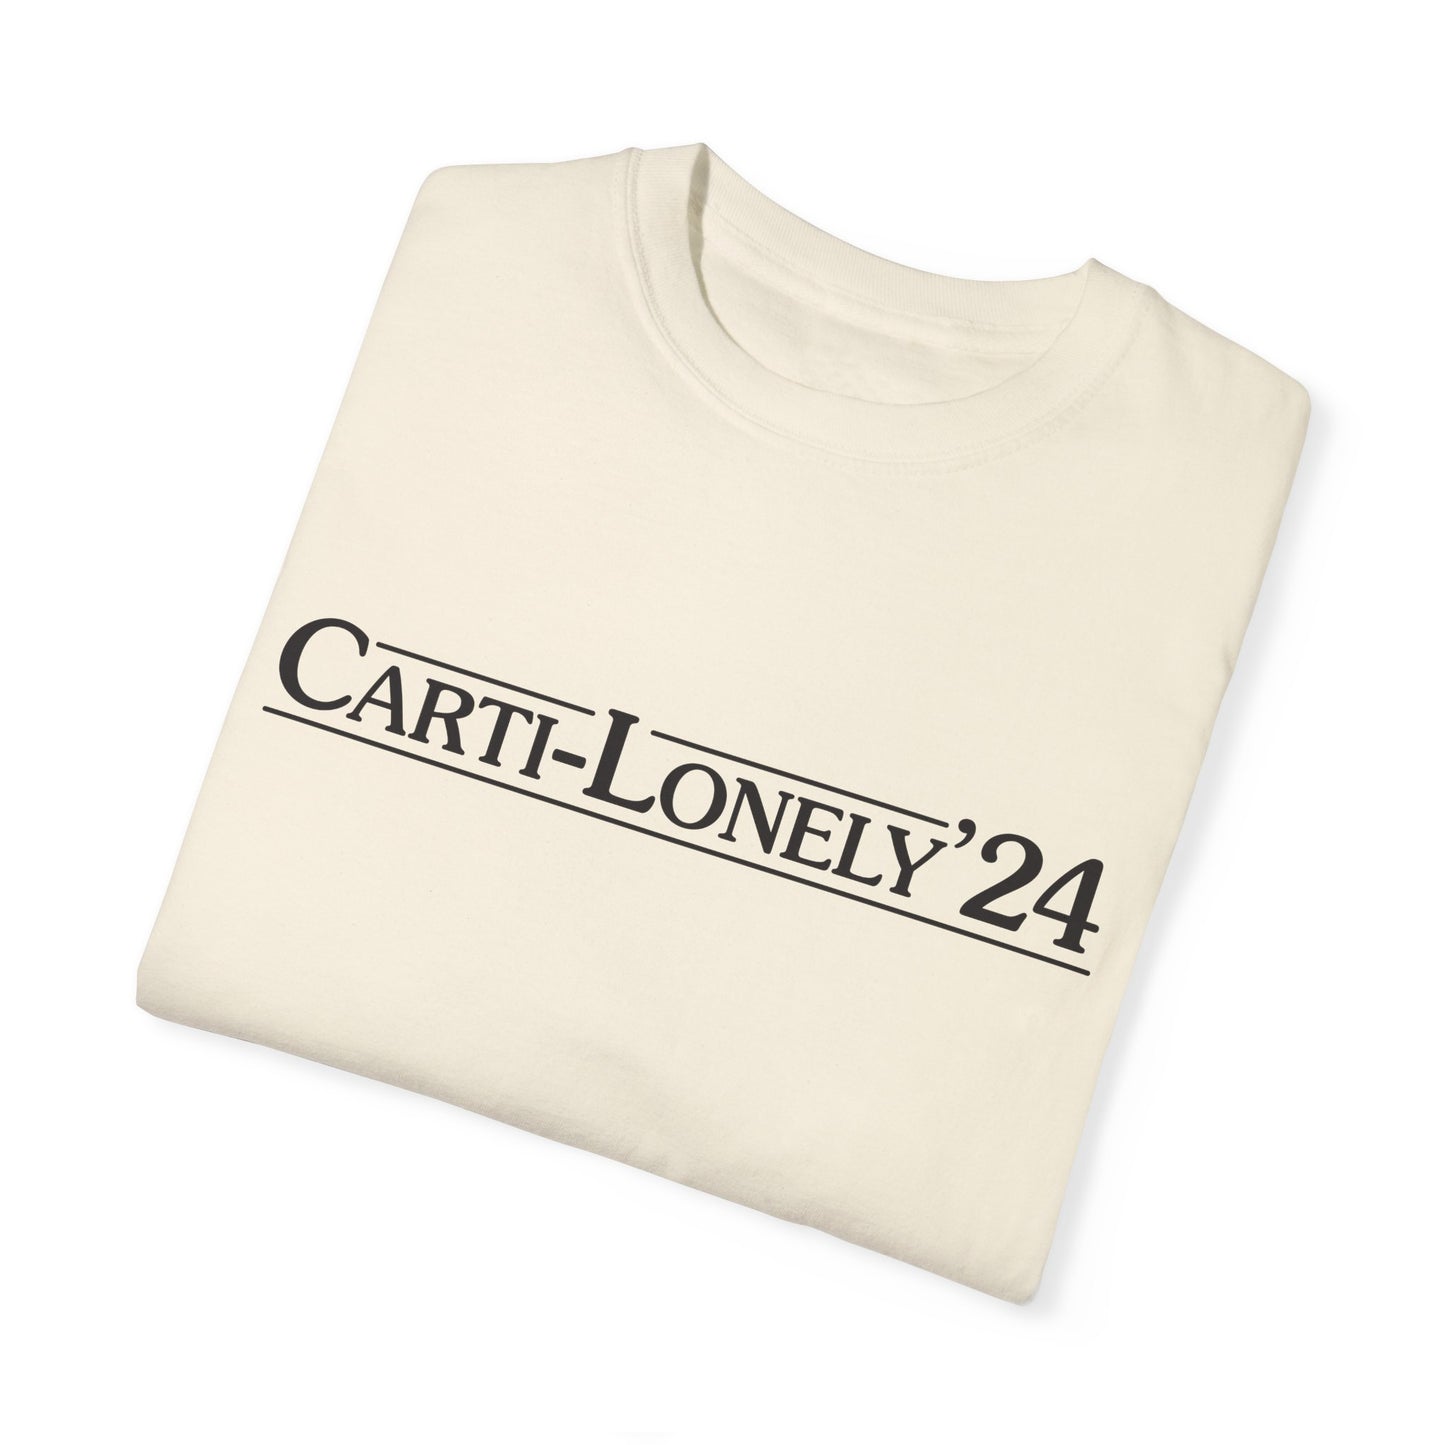 Carti-Lonely '24 T-Shirt